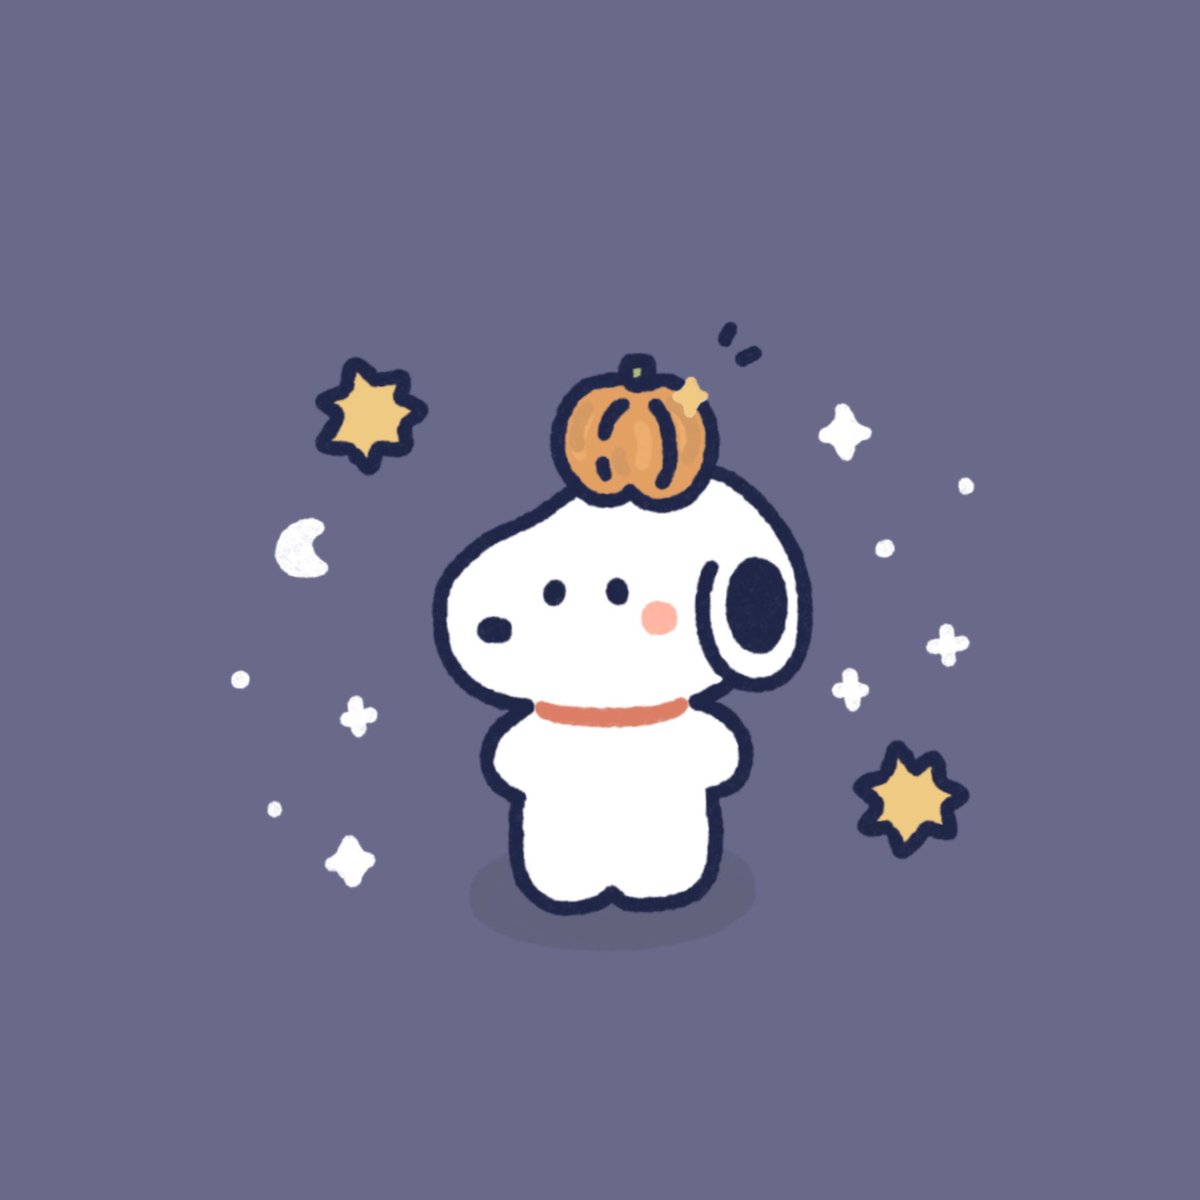 happy halloween! here’s a spoopy baby snoopy doodle hehe